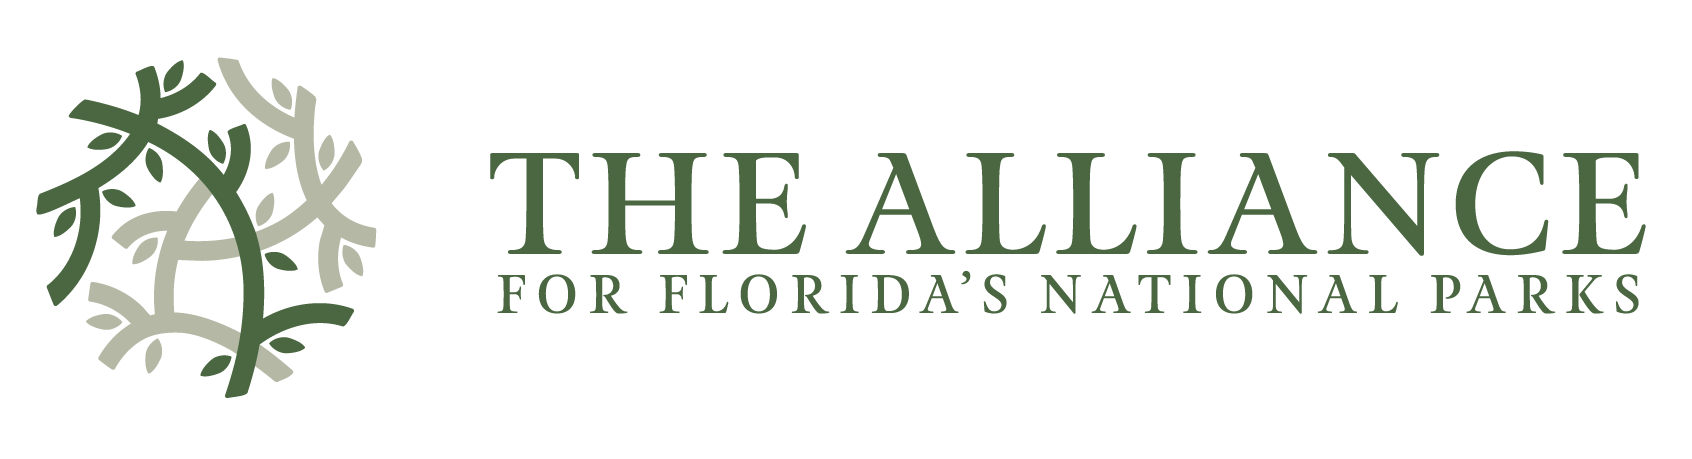 Logo with leaves and branches of two shades of green and words that read "The Alliance For Florida's National Parks"